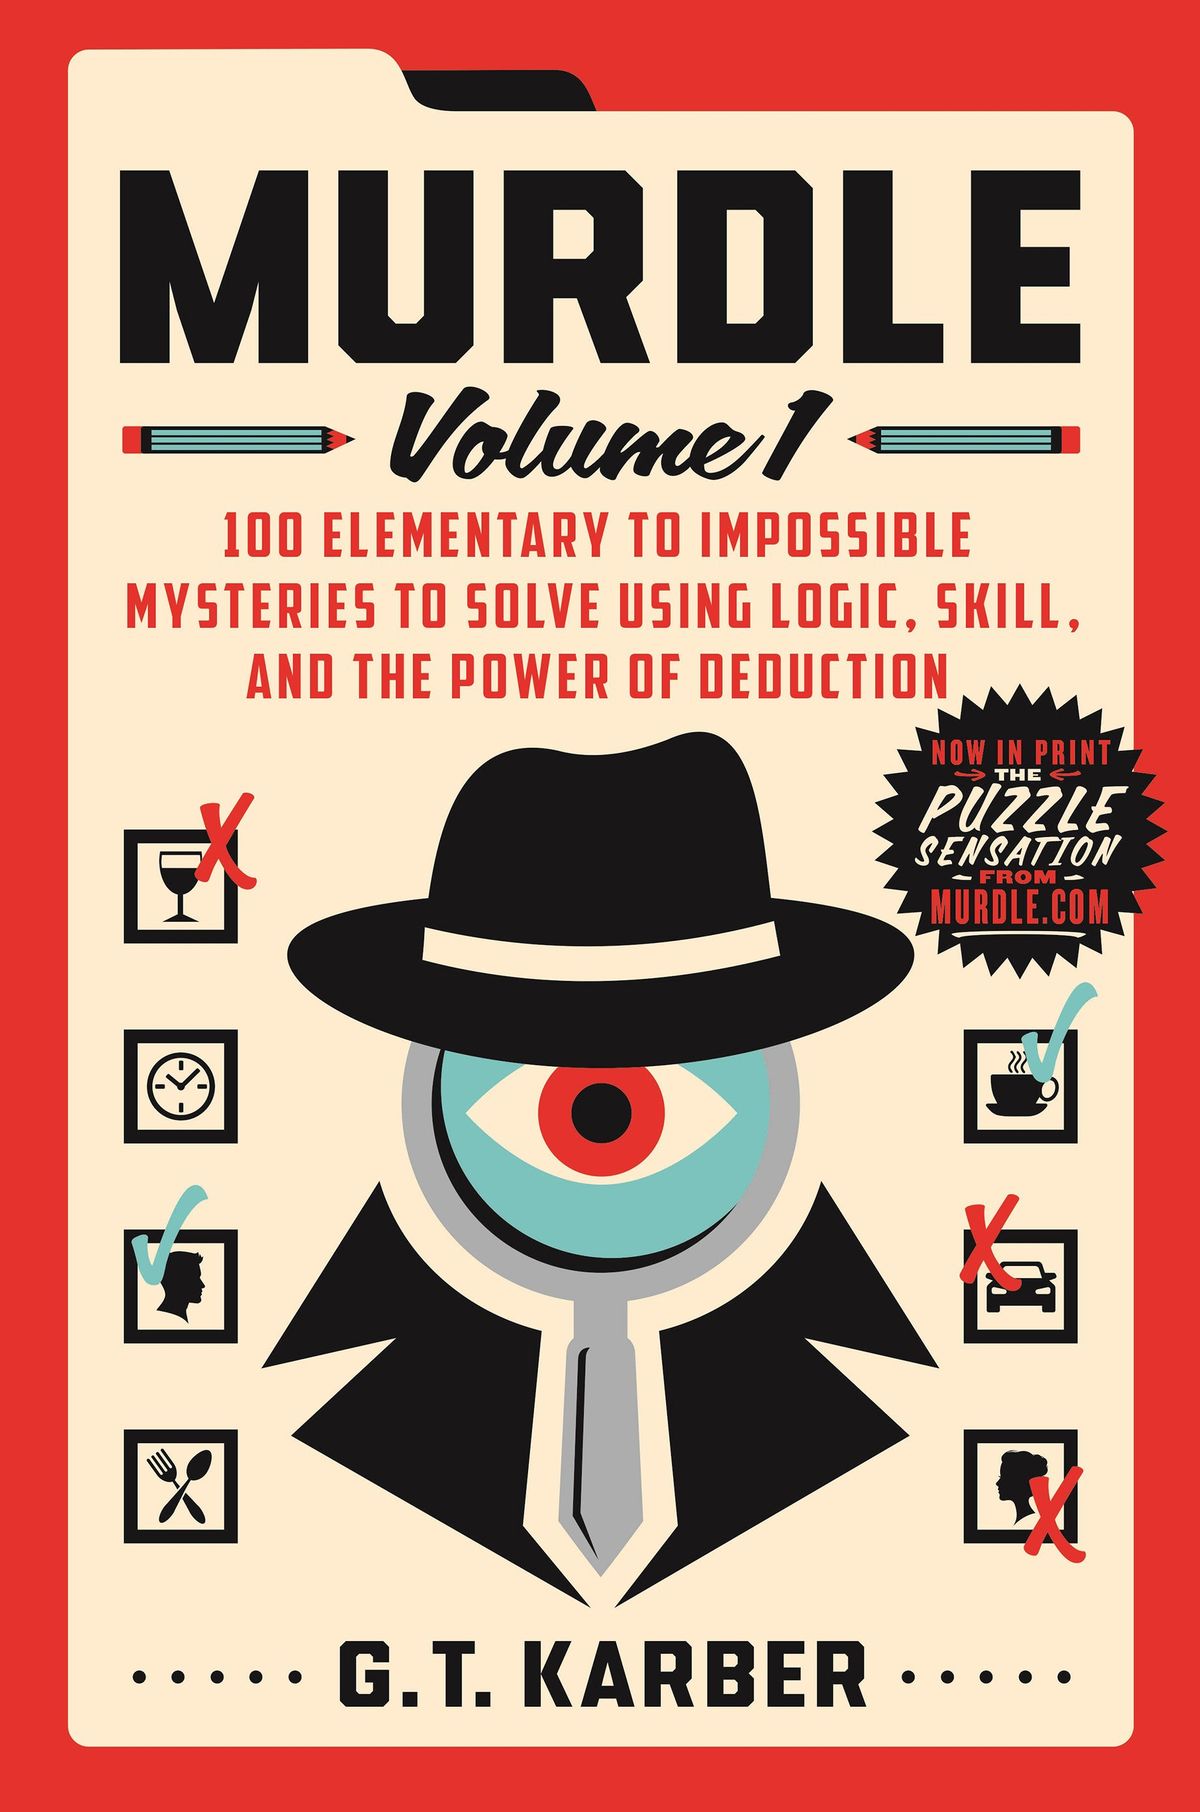 “Murdle: Volume 1,” by G T Karber. MUST CREDIT: Griffin  (Griffin)